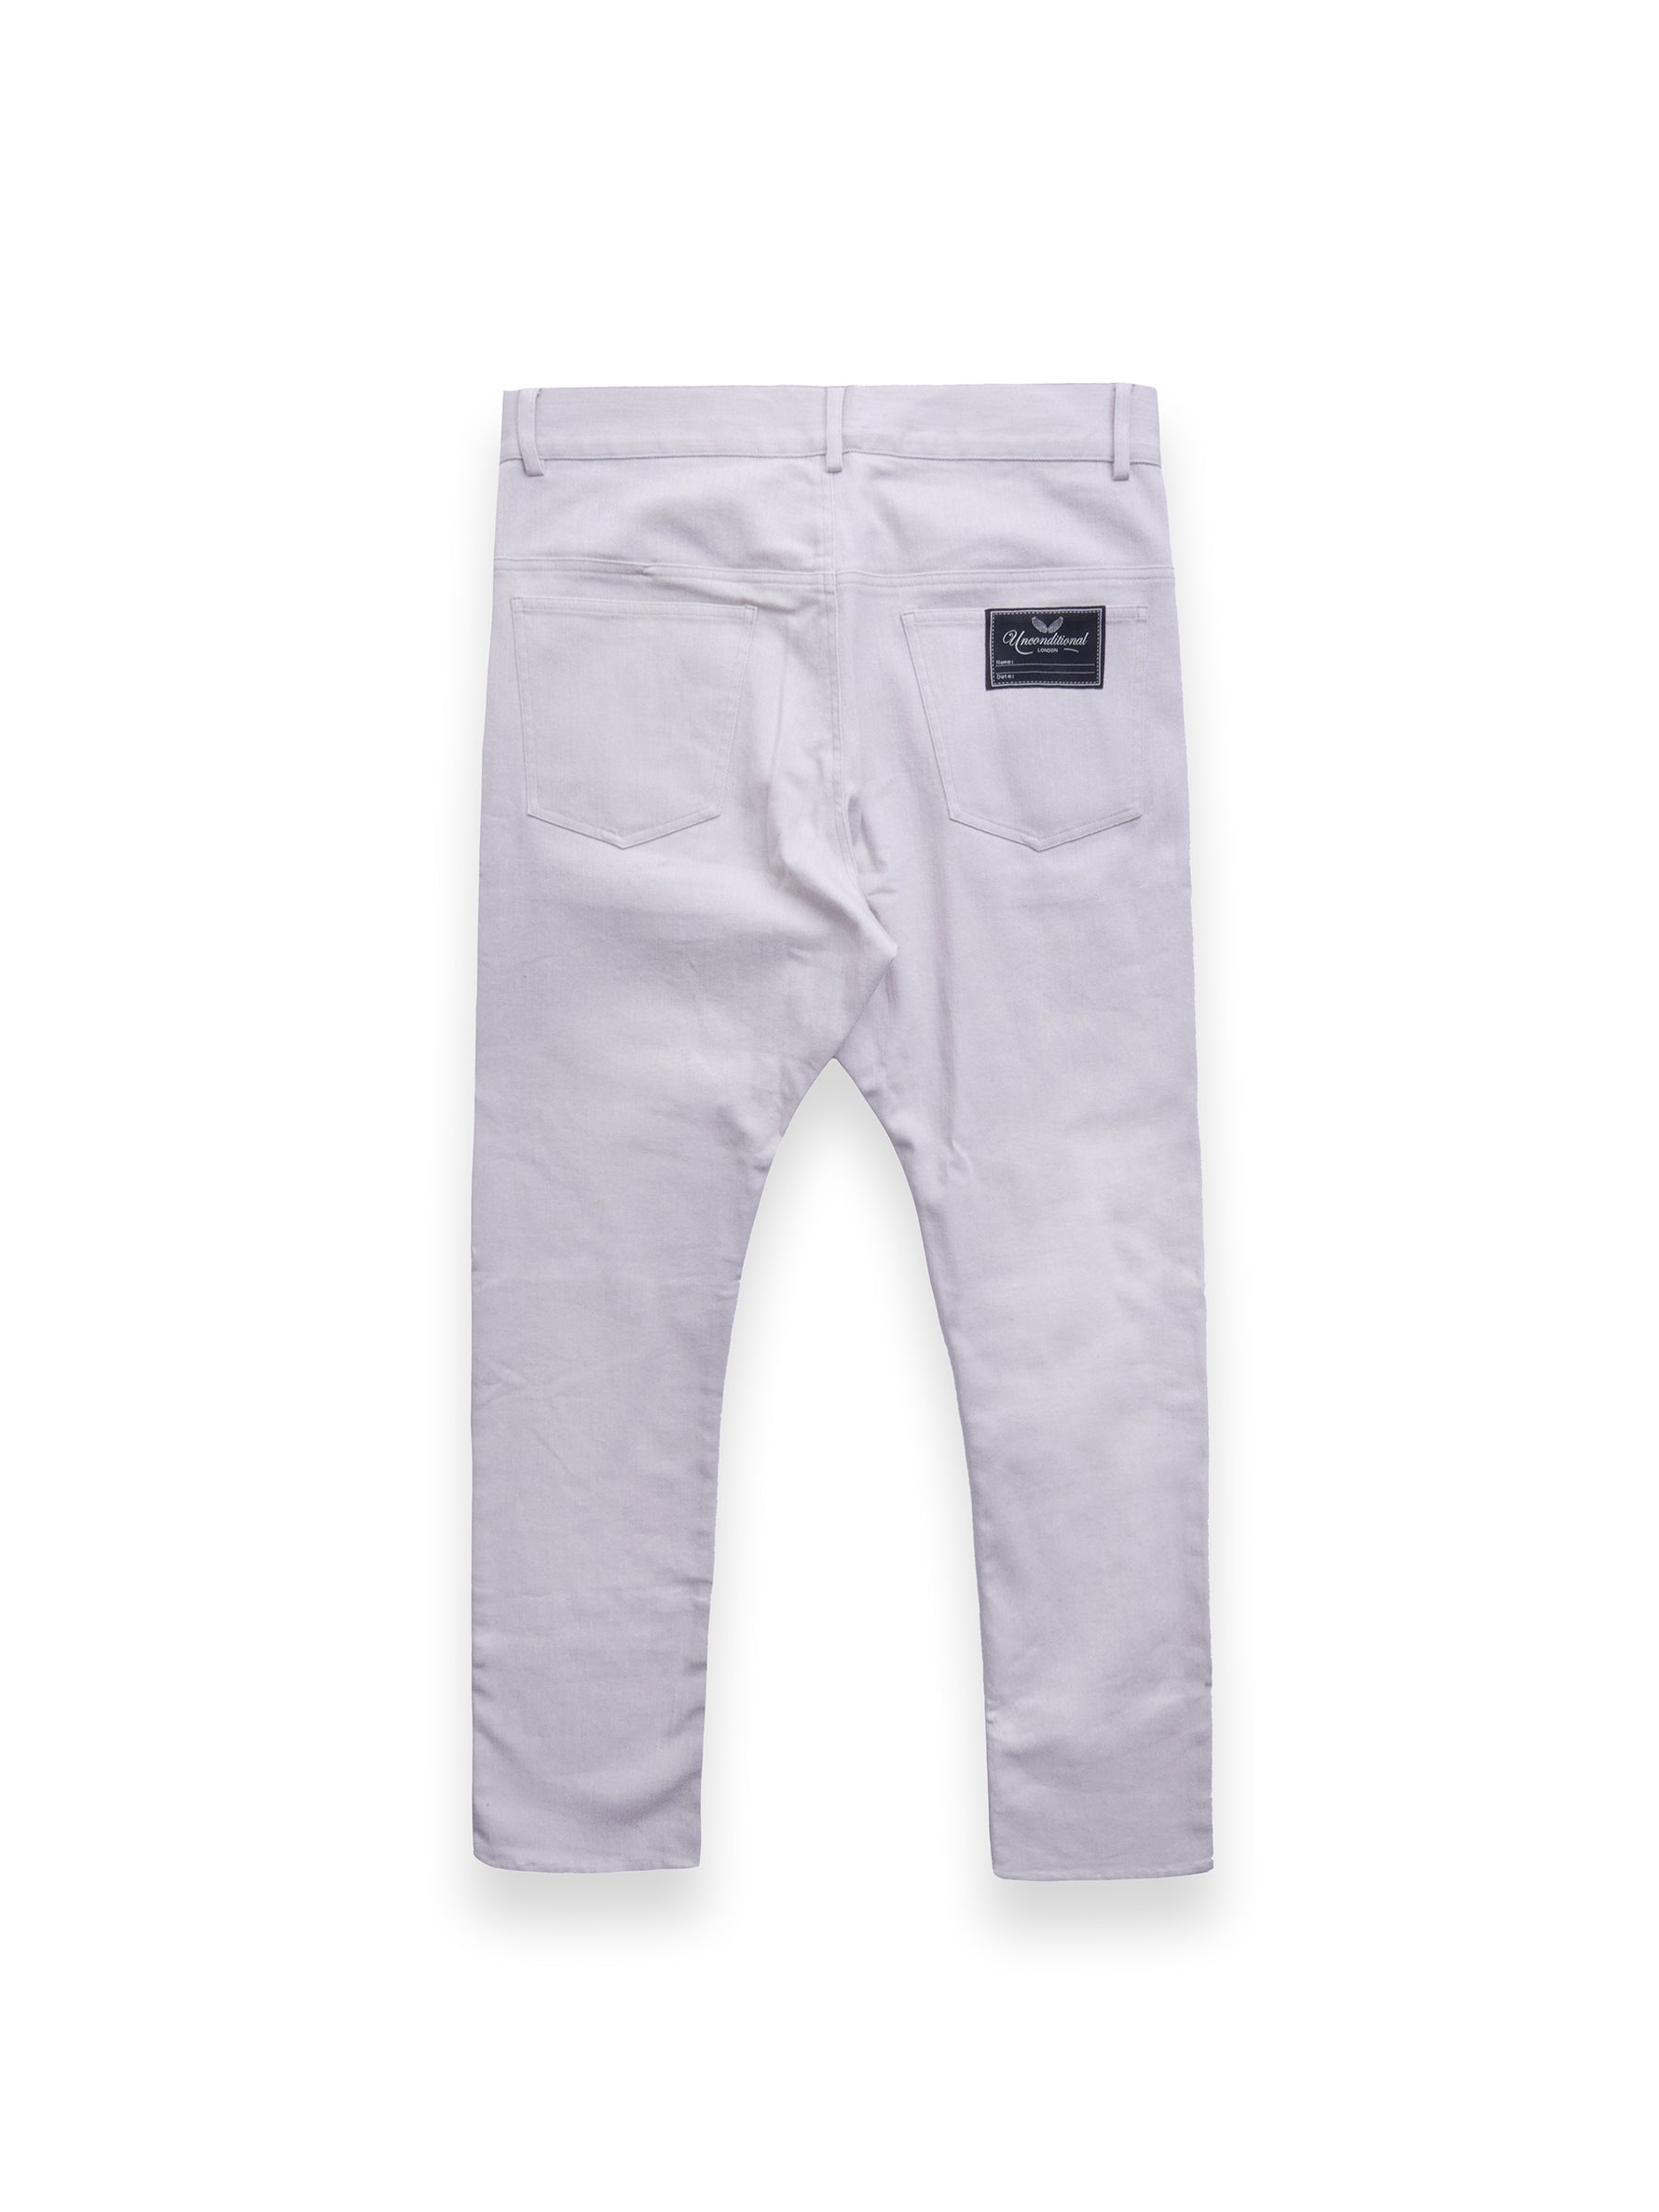 Off White Unconditional Jeans With Black Zip Details